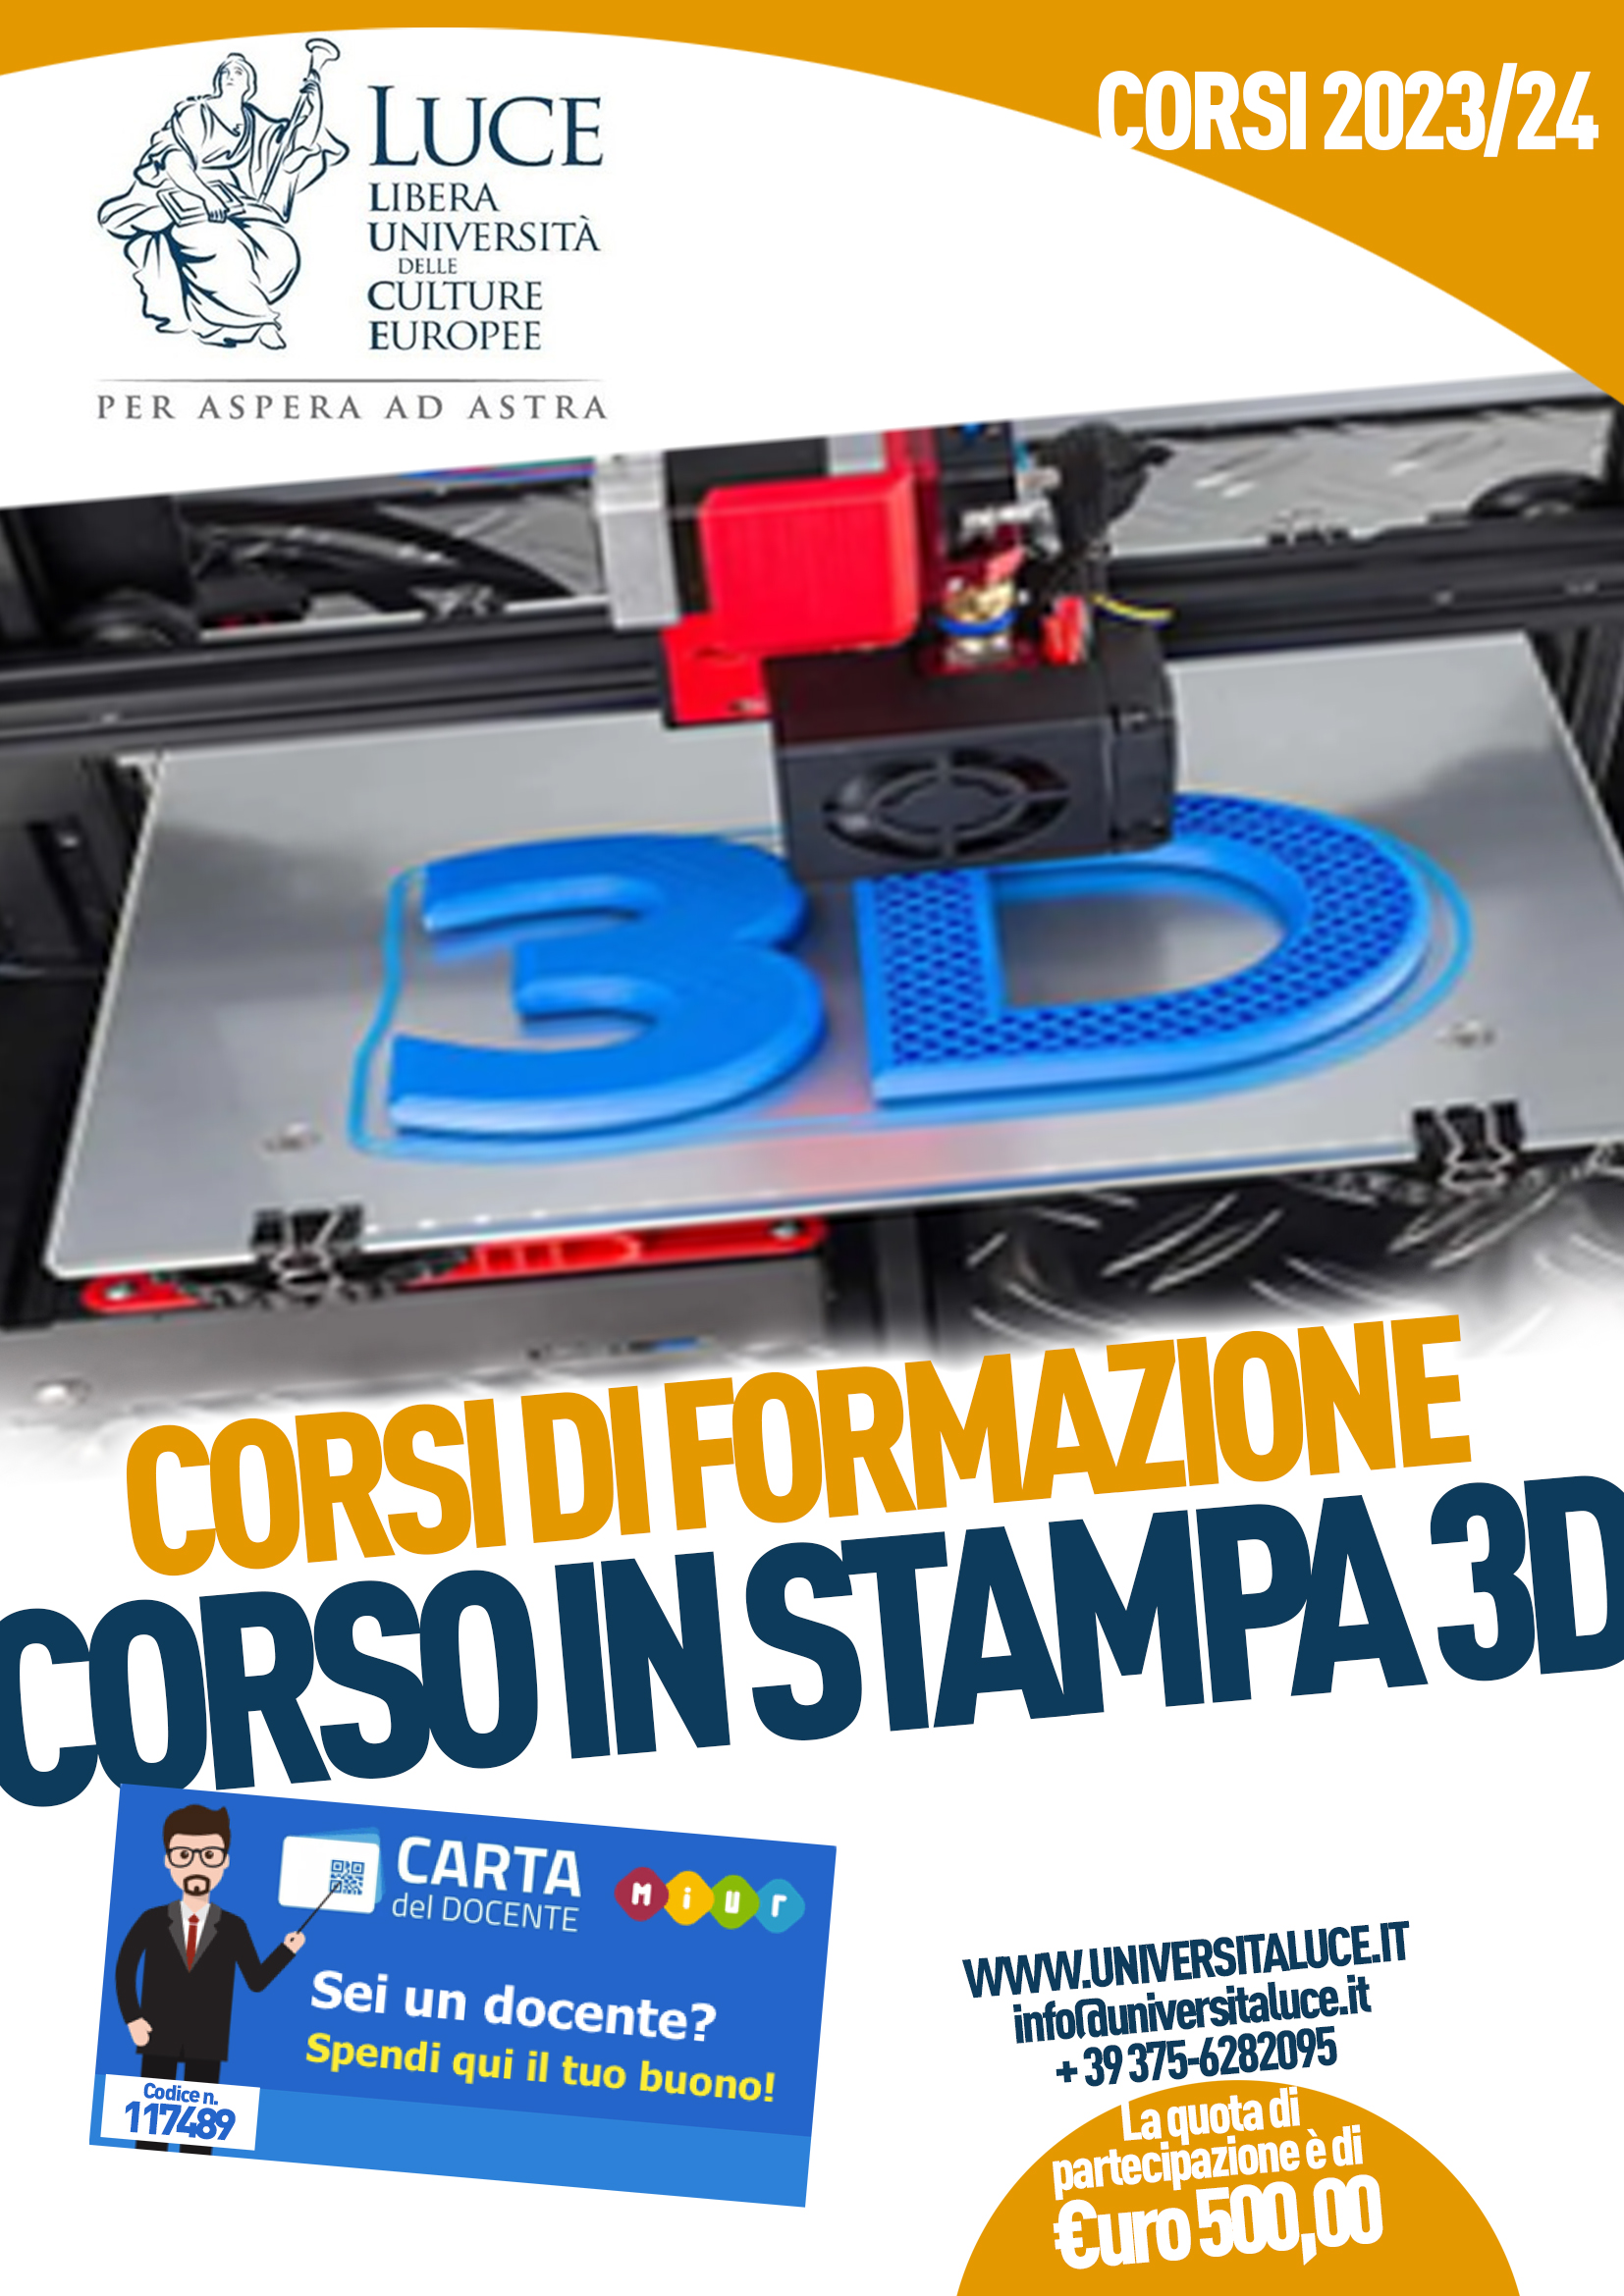 Corso in Stampa 3D – LUCE